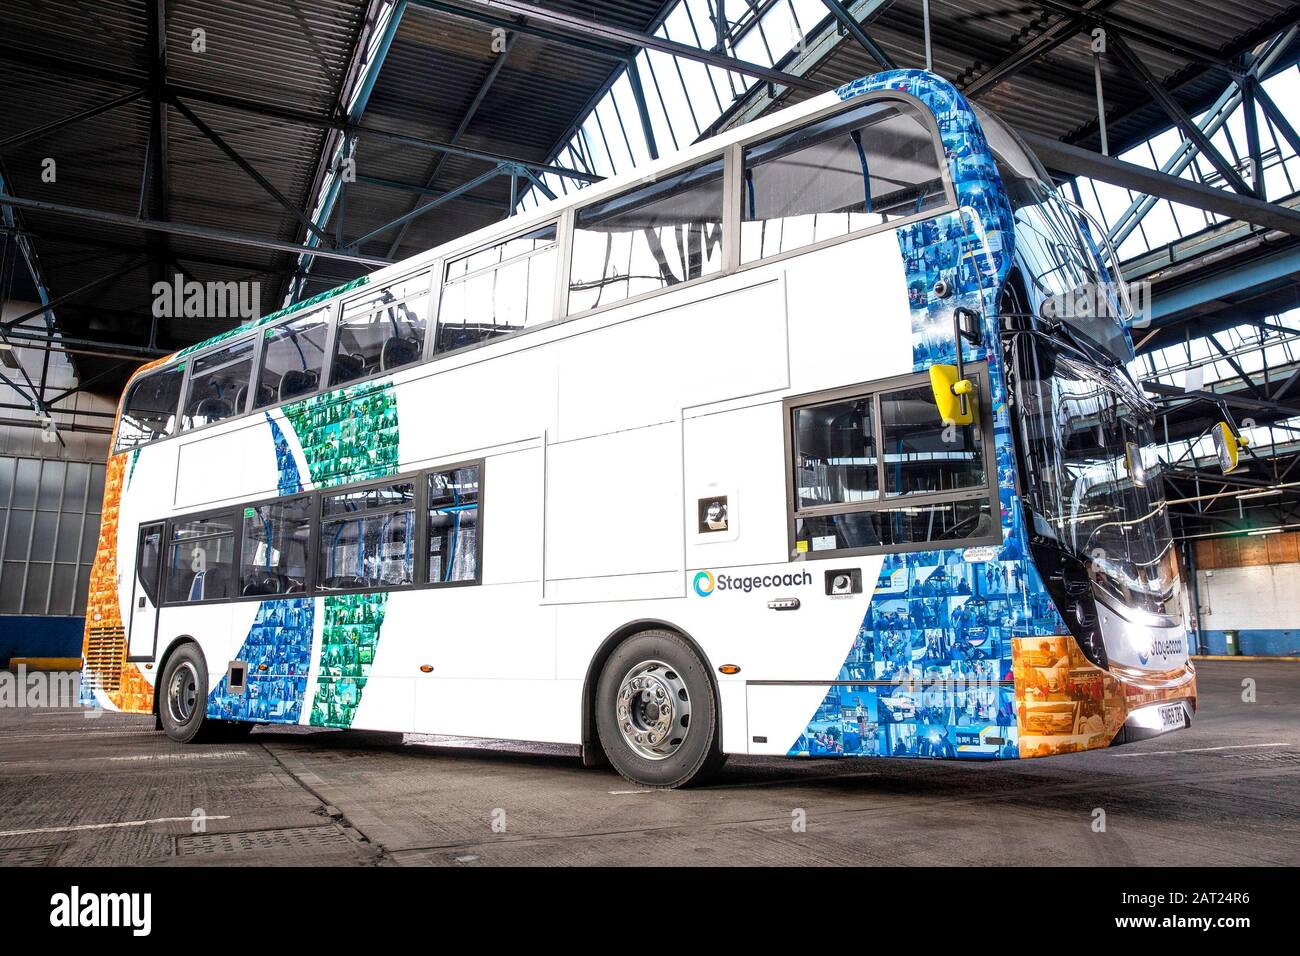 A one-of-a-kind mosaic bus livery, which features the faces of Stagecoach customers and drivers from across the UK, is unveiled to celebrate the launch of its new look bus design in its 40th year of service, at the Chesterfield depot in Derbyshire. Stock Photo